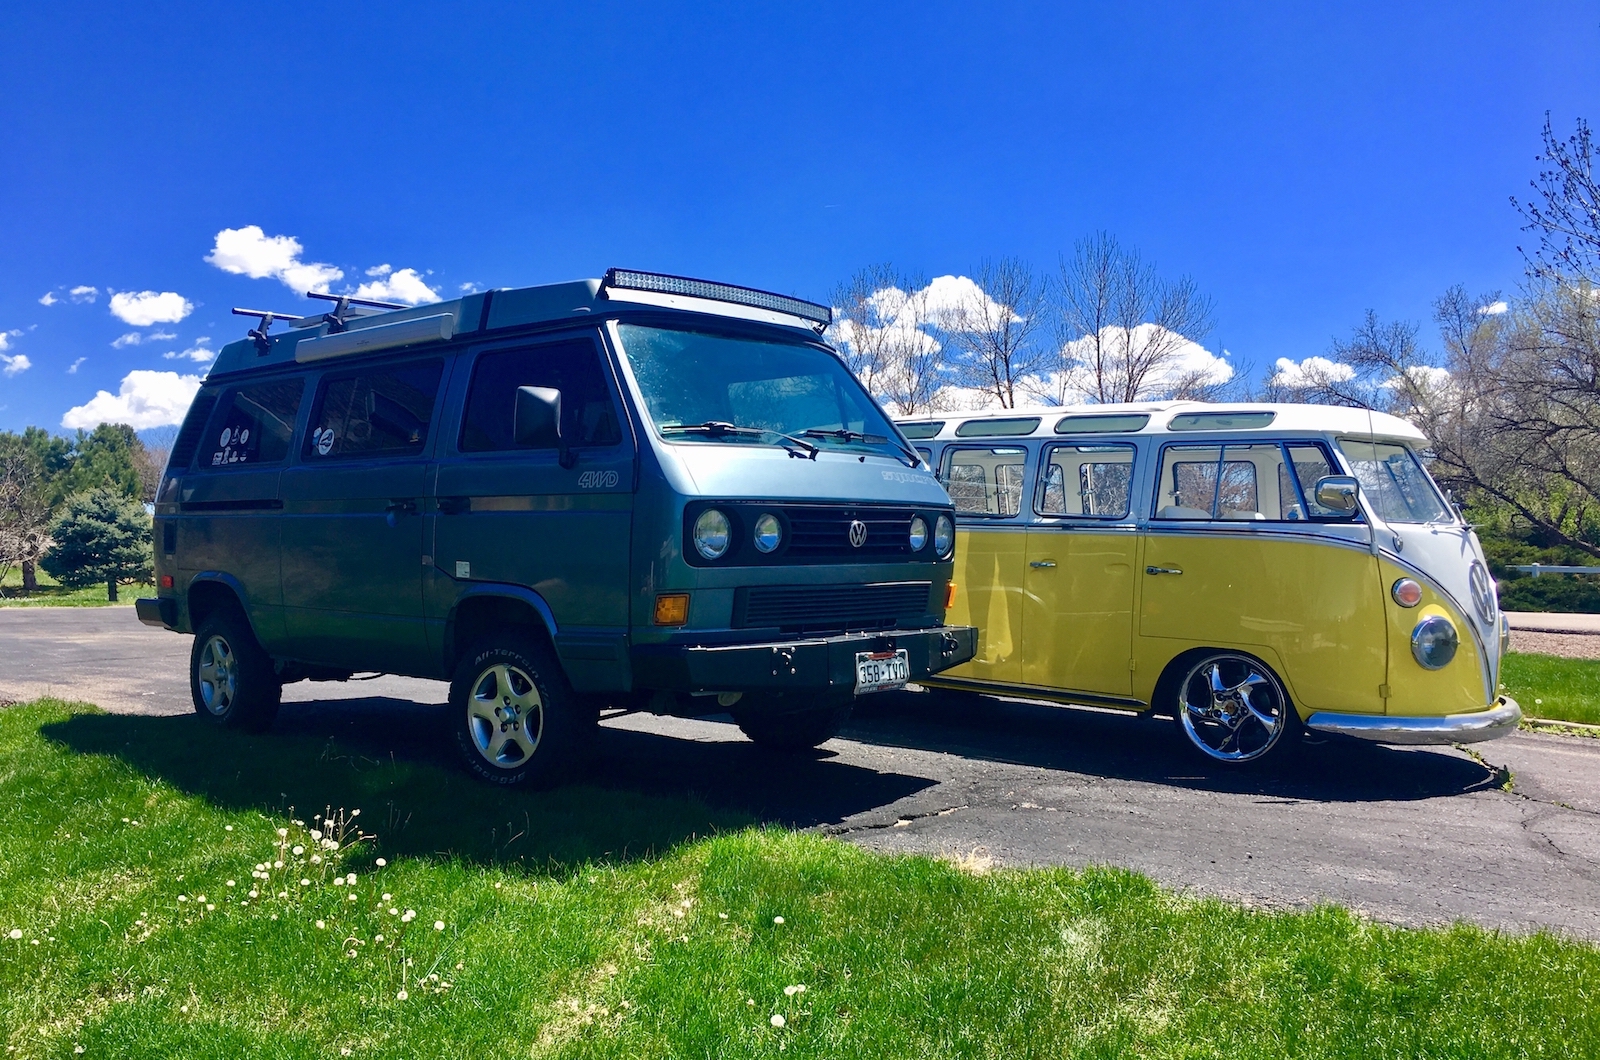 The Bus and the Syncro